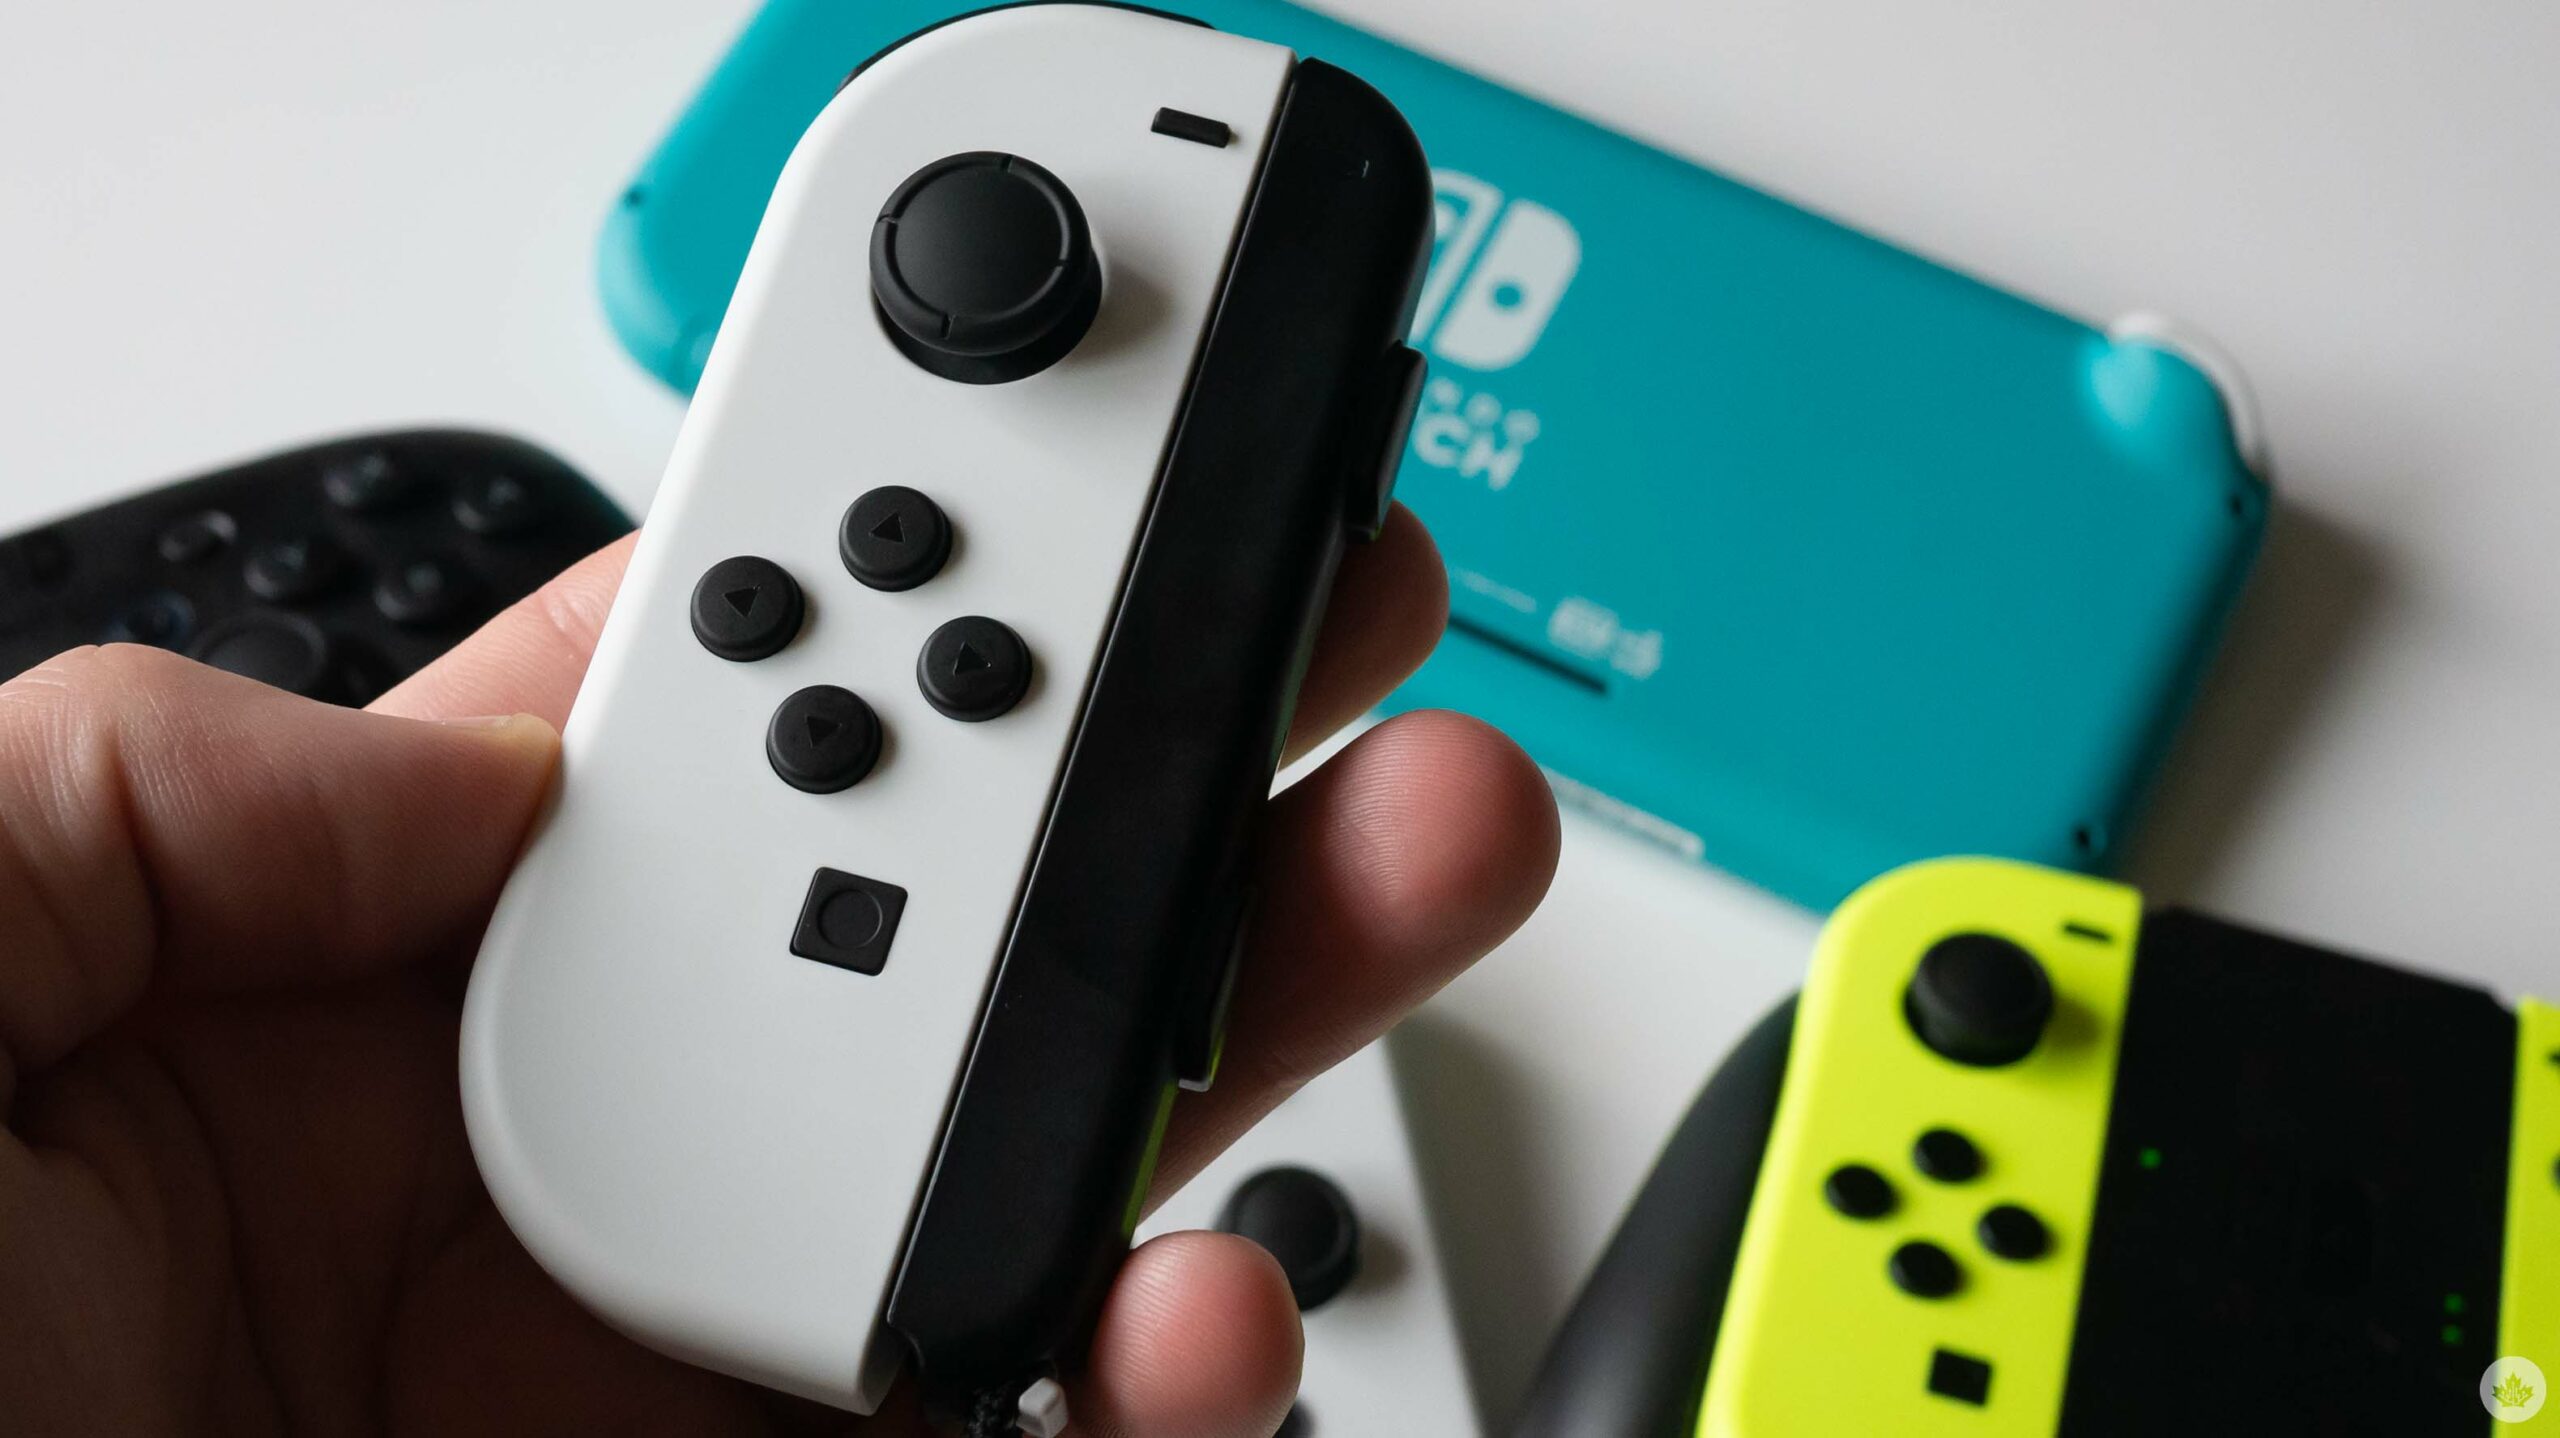 Steam finally adds support for Nintendo Joy-Con controllers